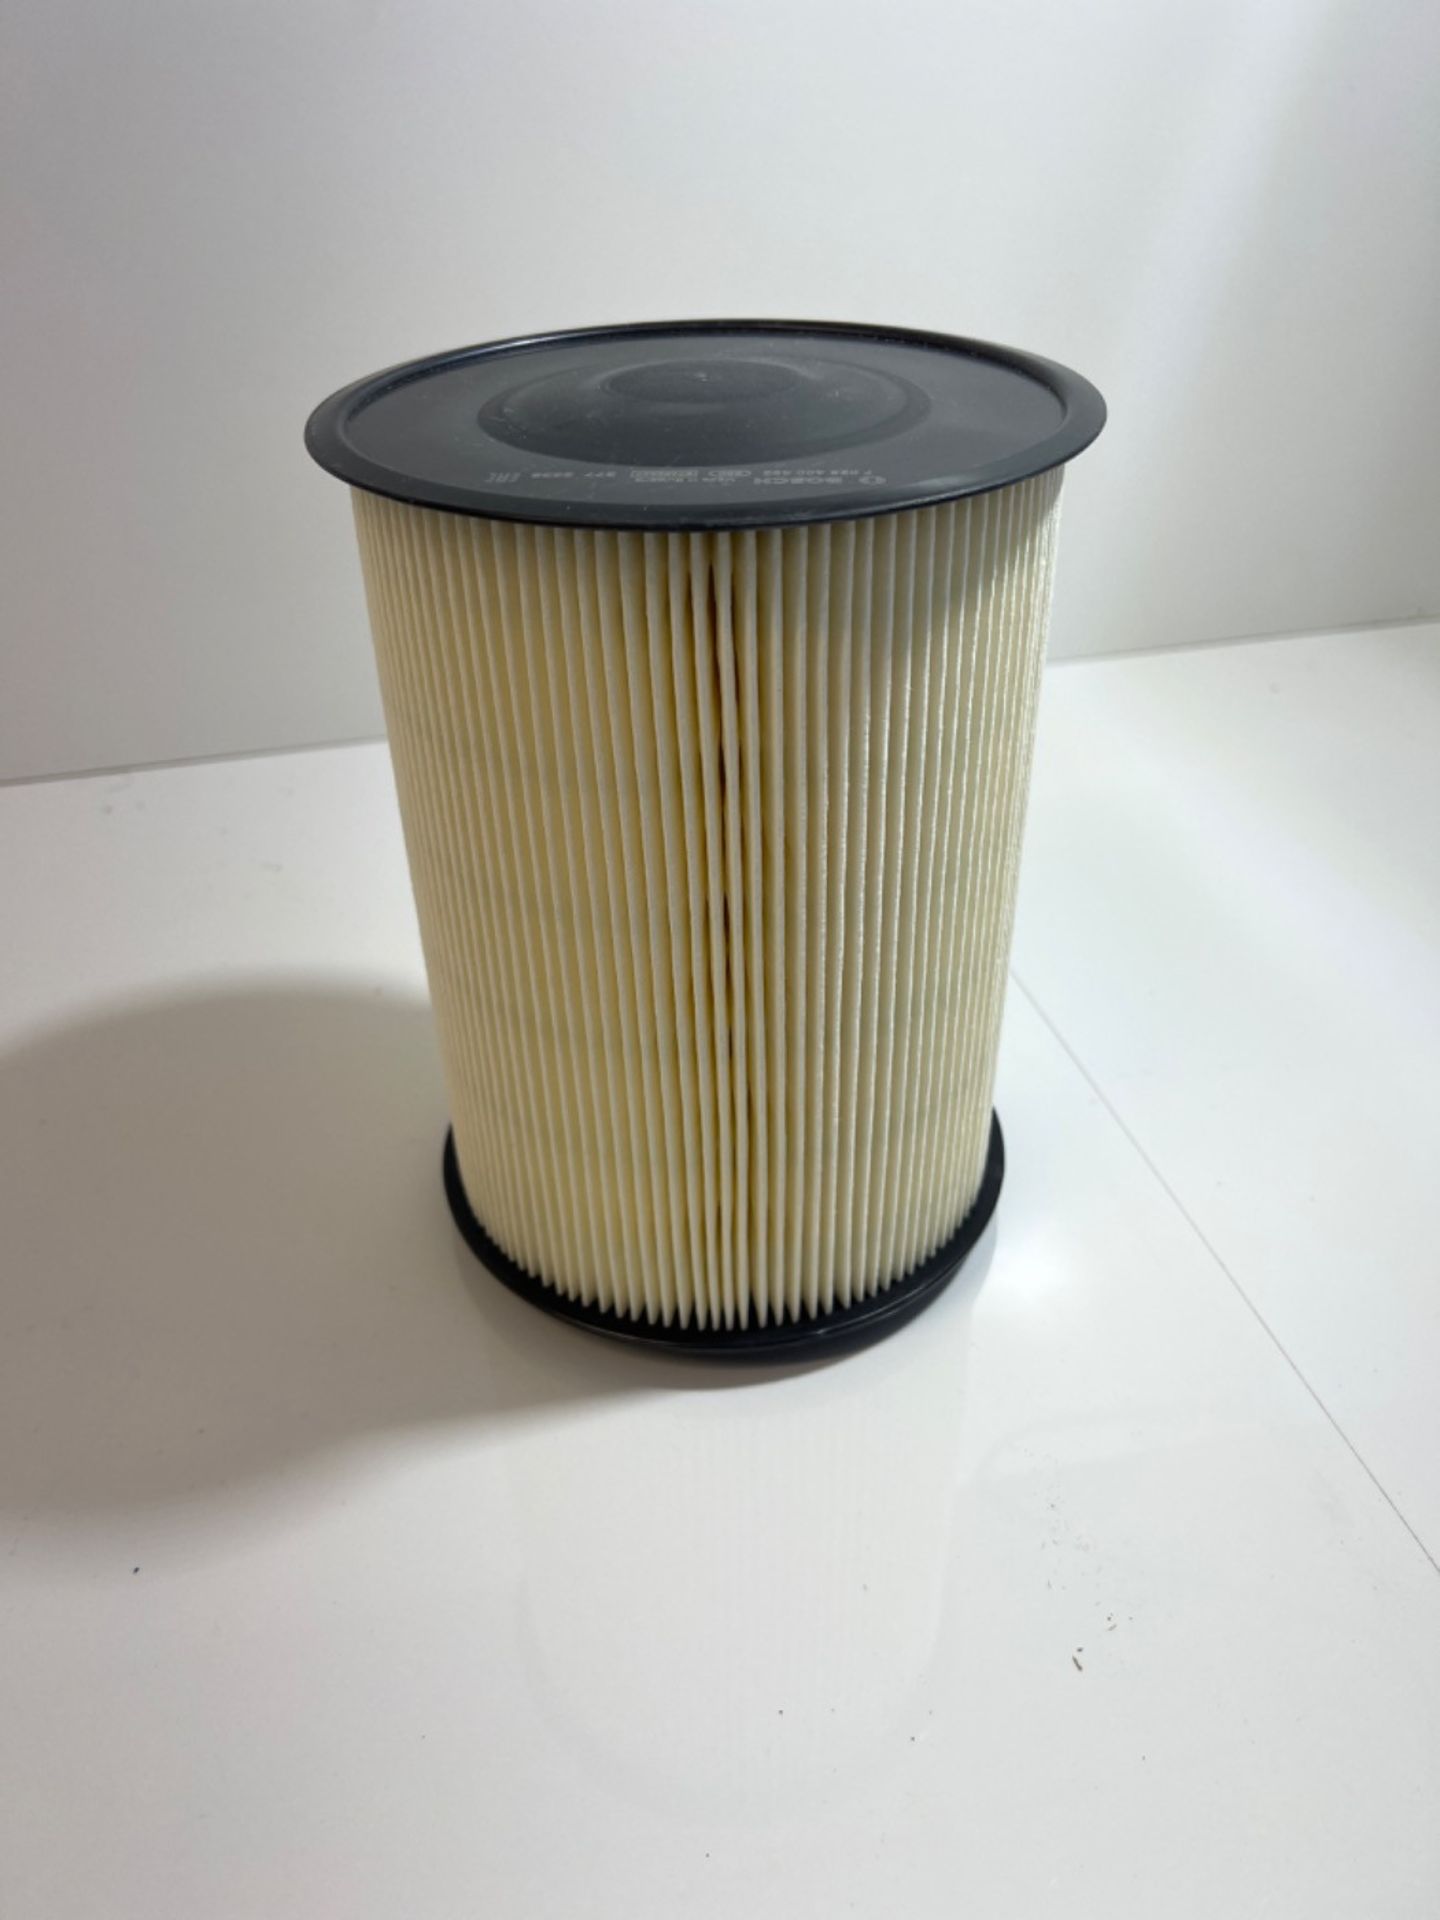 Bosch S0492 - Air Filter Car - Image 2 of 3